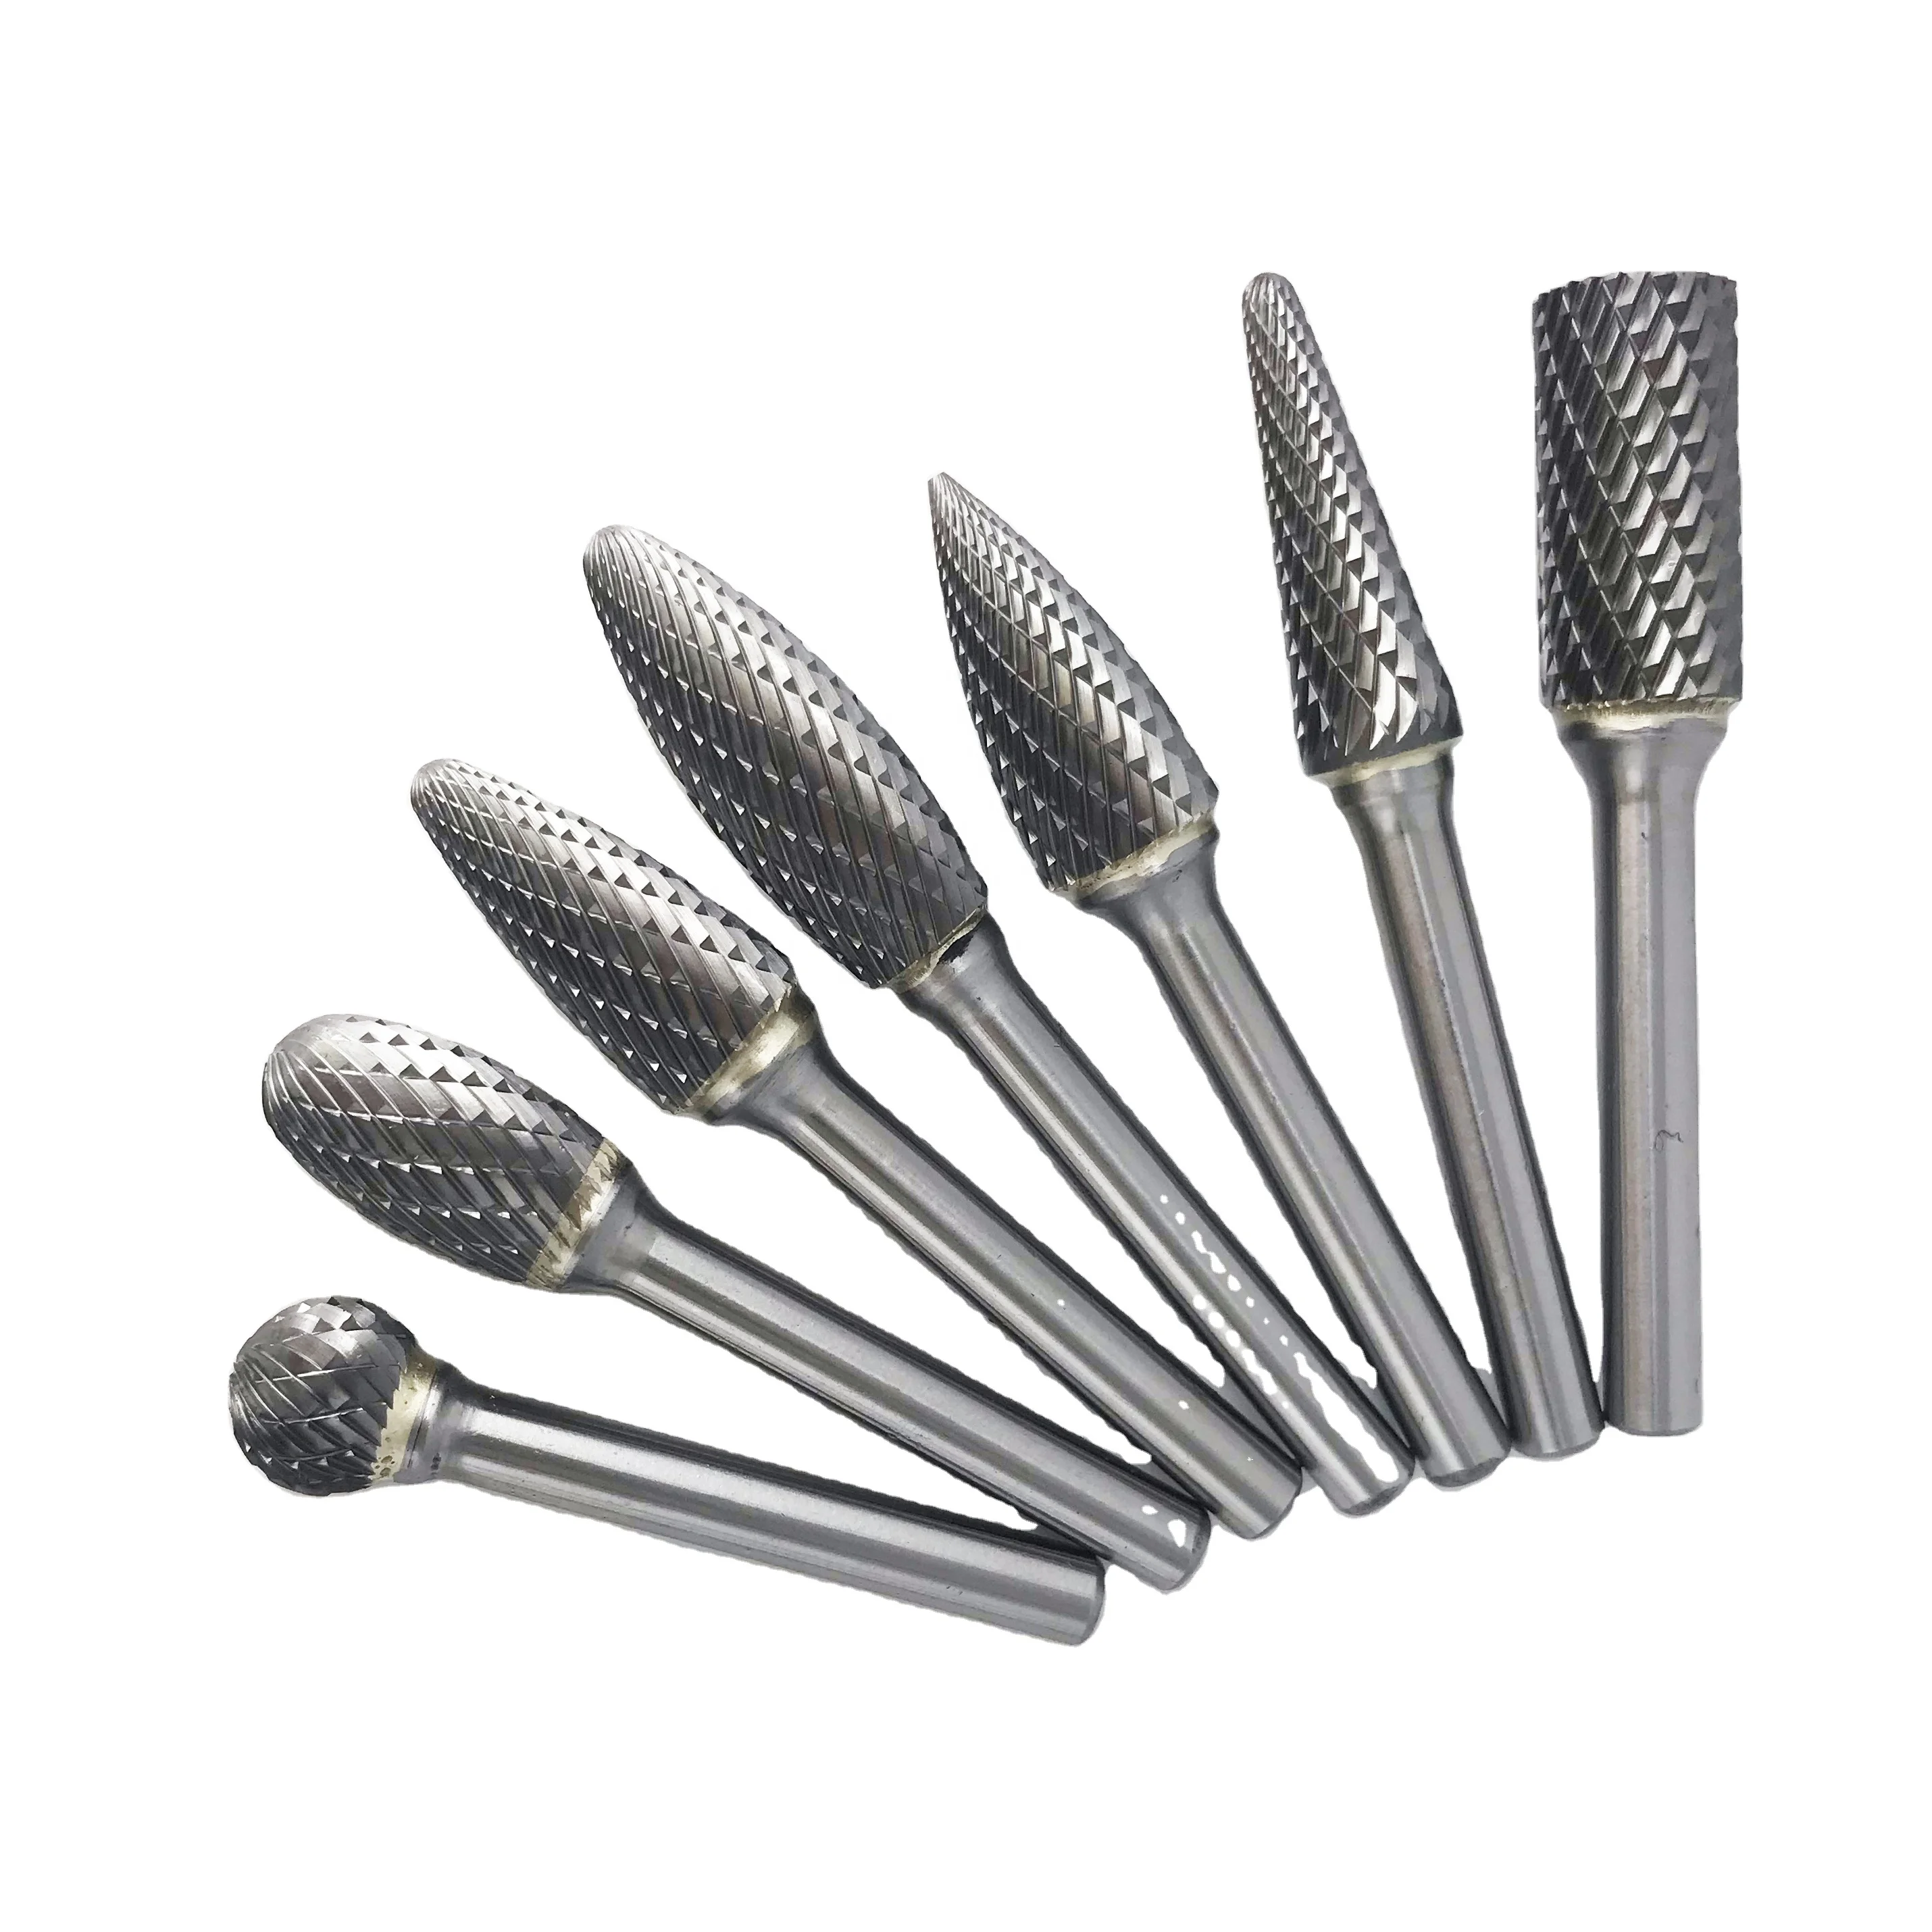 WUWTOOLS Tungsten Carbide Cutting Burrs SD-3 1/4 Shank Double Cut Die Grinder Bit Rotary File Accessories for Wood Stone Carving Metal Glass Grinding Engraving Polishing Cutting Shaping and Drilling 